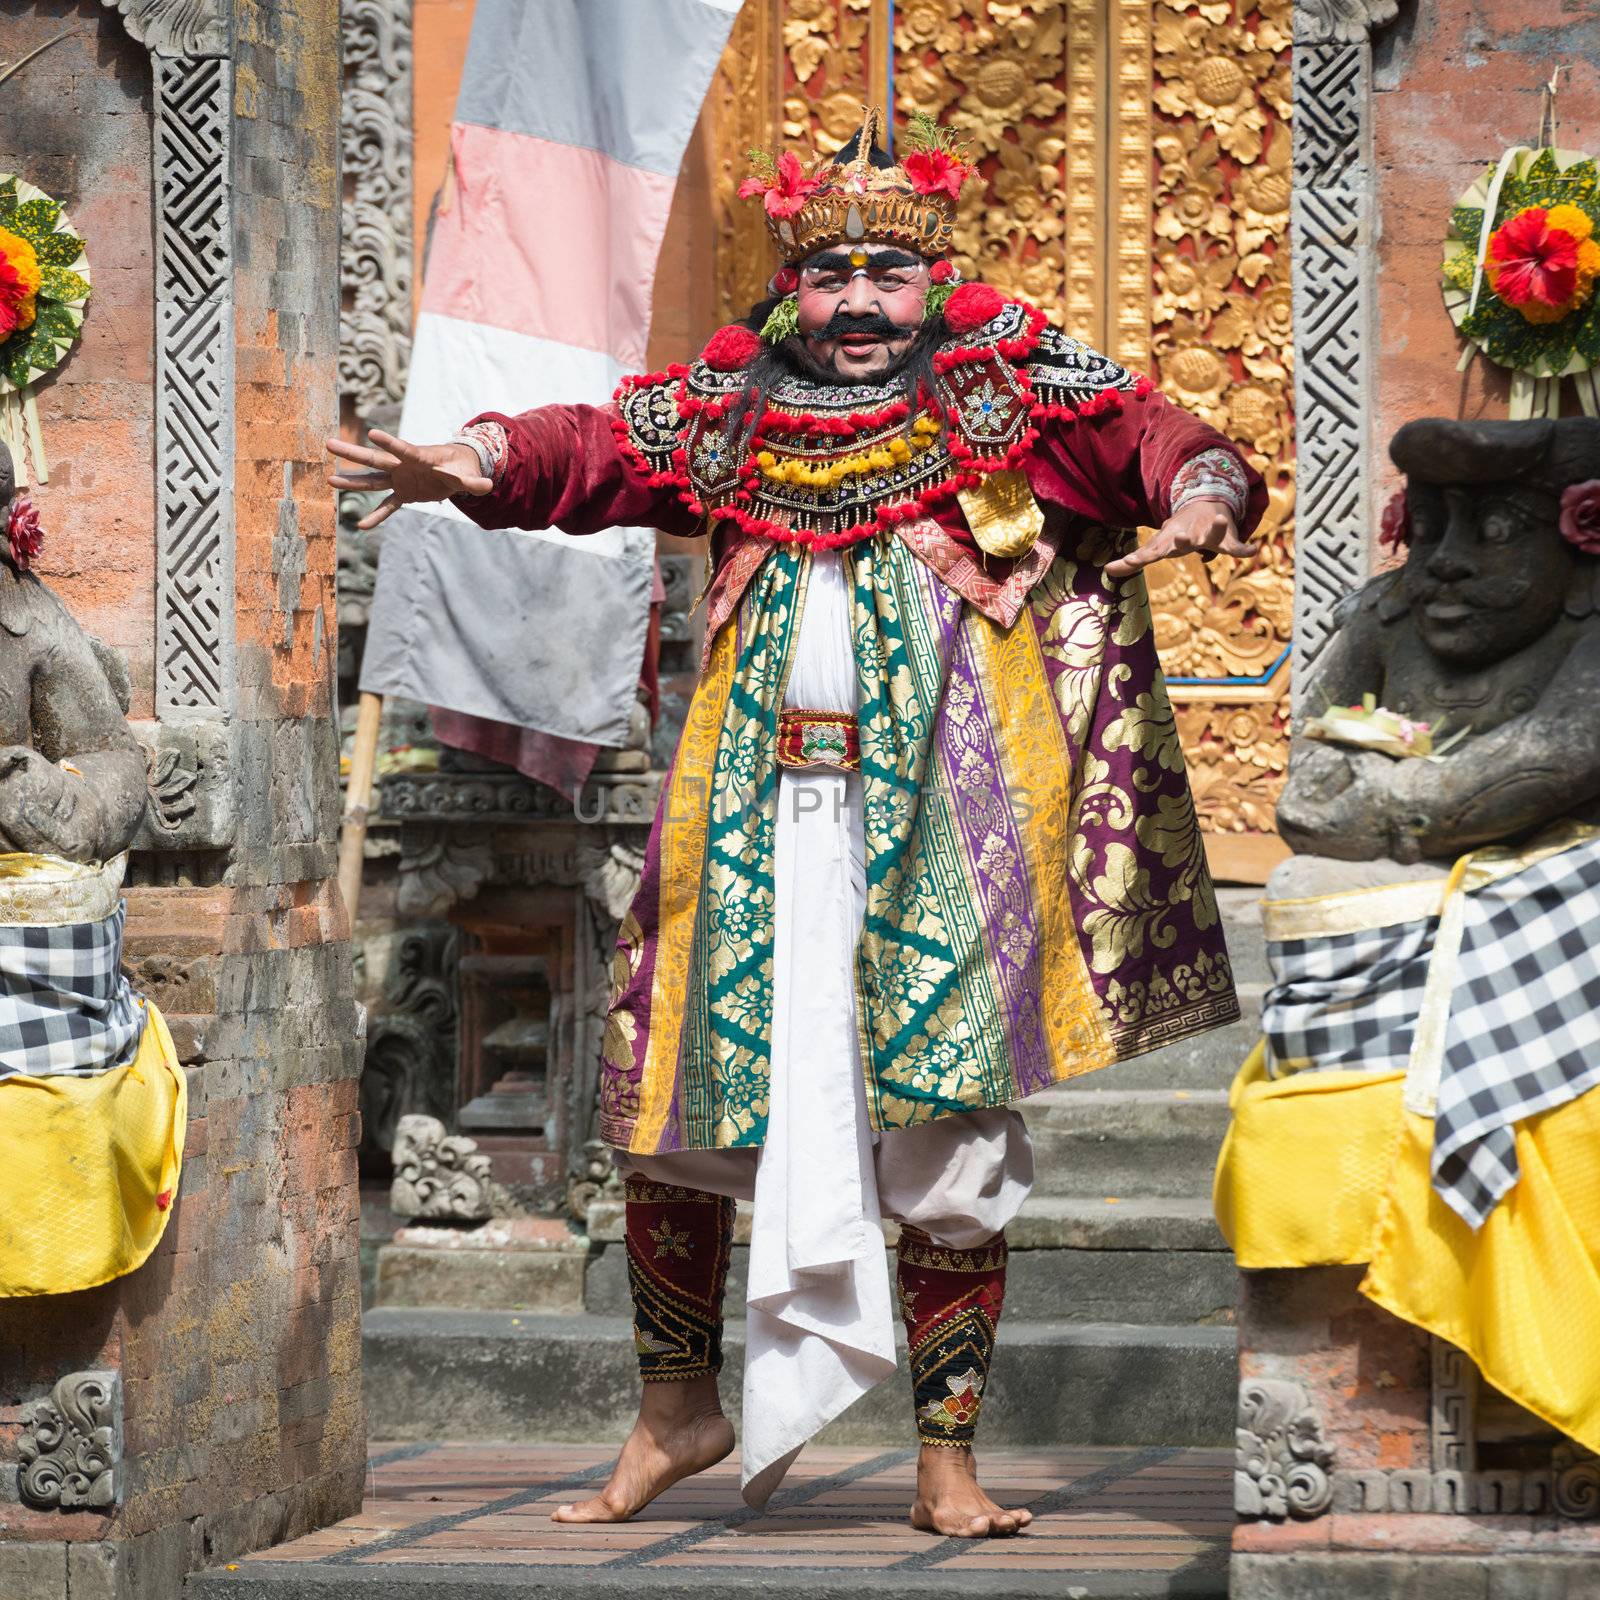 UBUD, BALI, INDONESIA - SEP 21: Actor performs an minister character on traditional balinese performance Barong on Sep 21, 2012 in Ubud, Bali, Indonesia. The show is popular tourist attraction on Bali